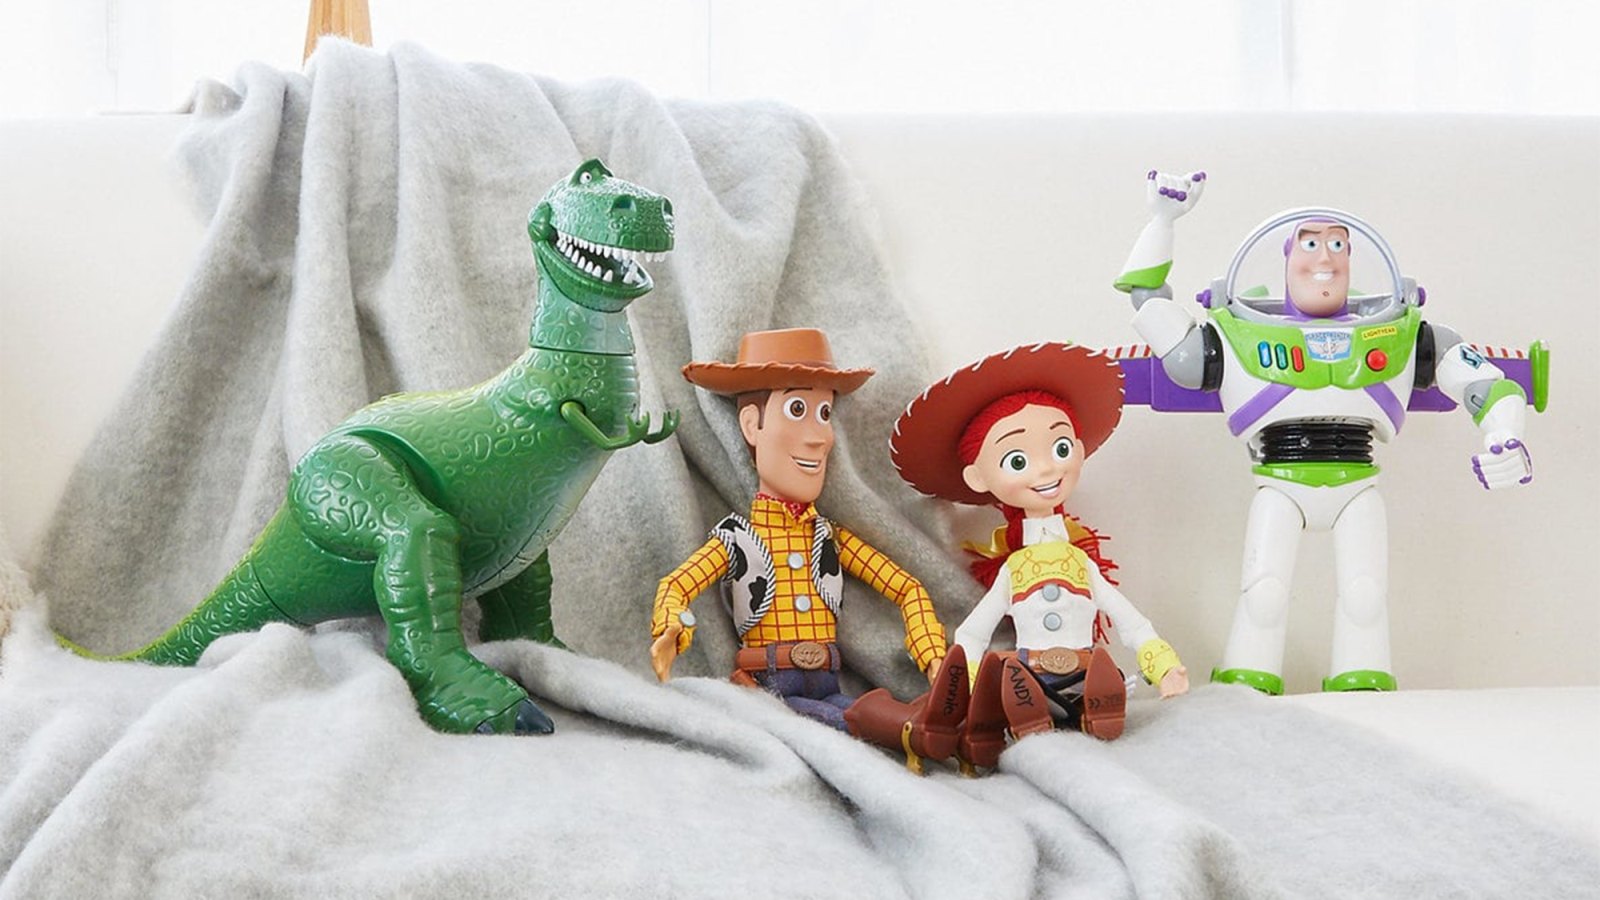 Toy Story 5': Everything We Know so Far About the Toys' Next Adventure